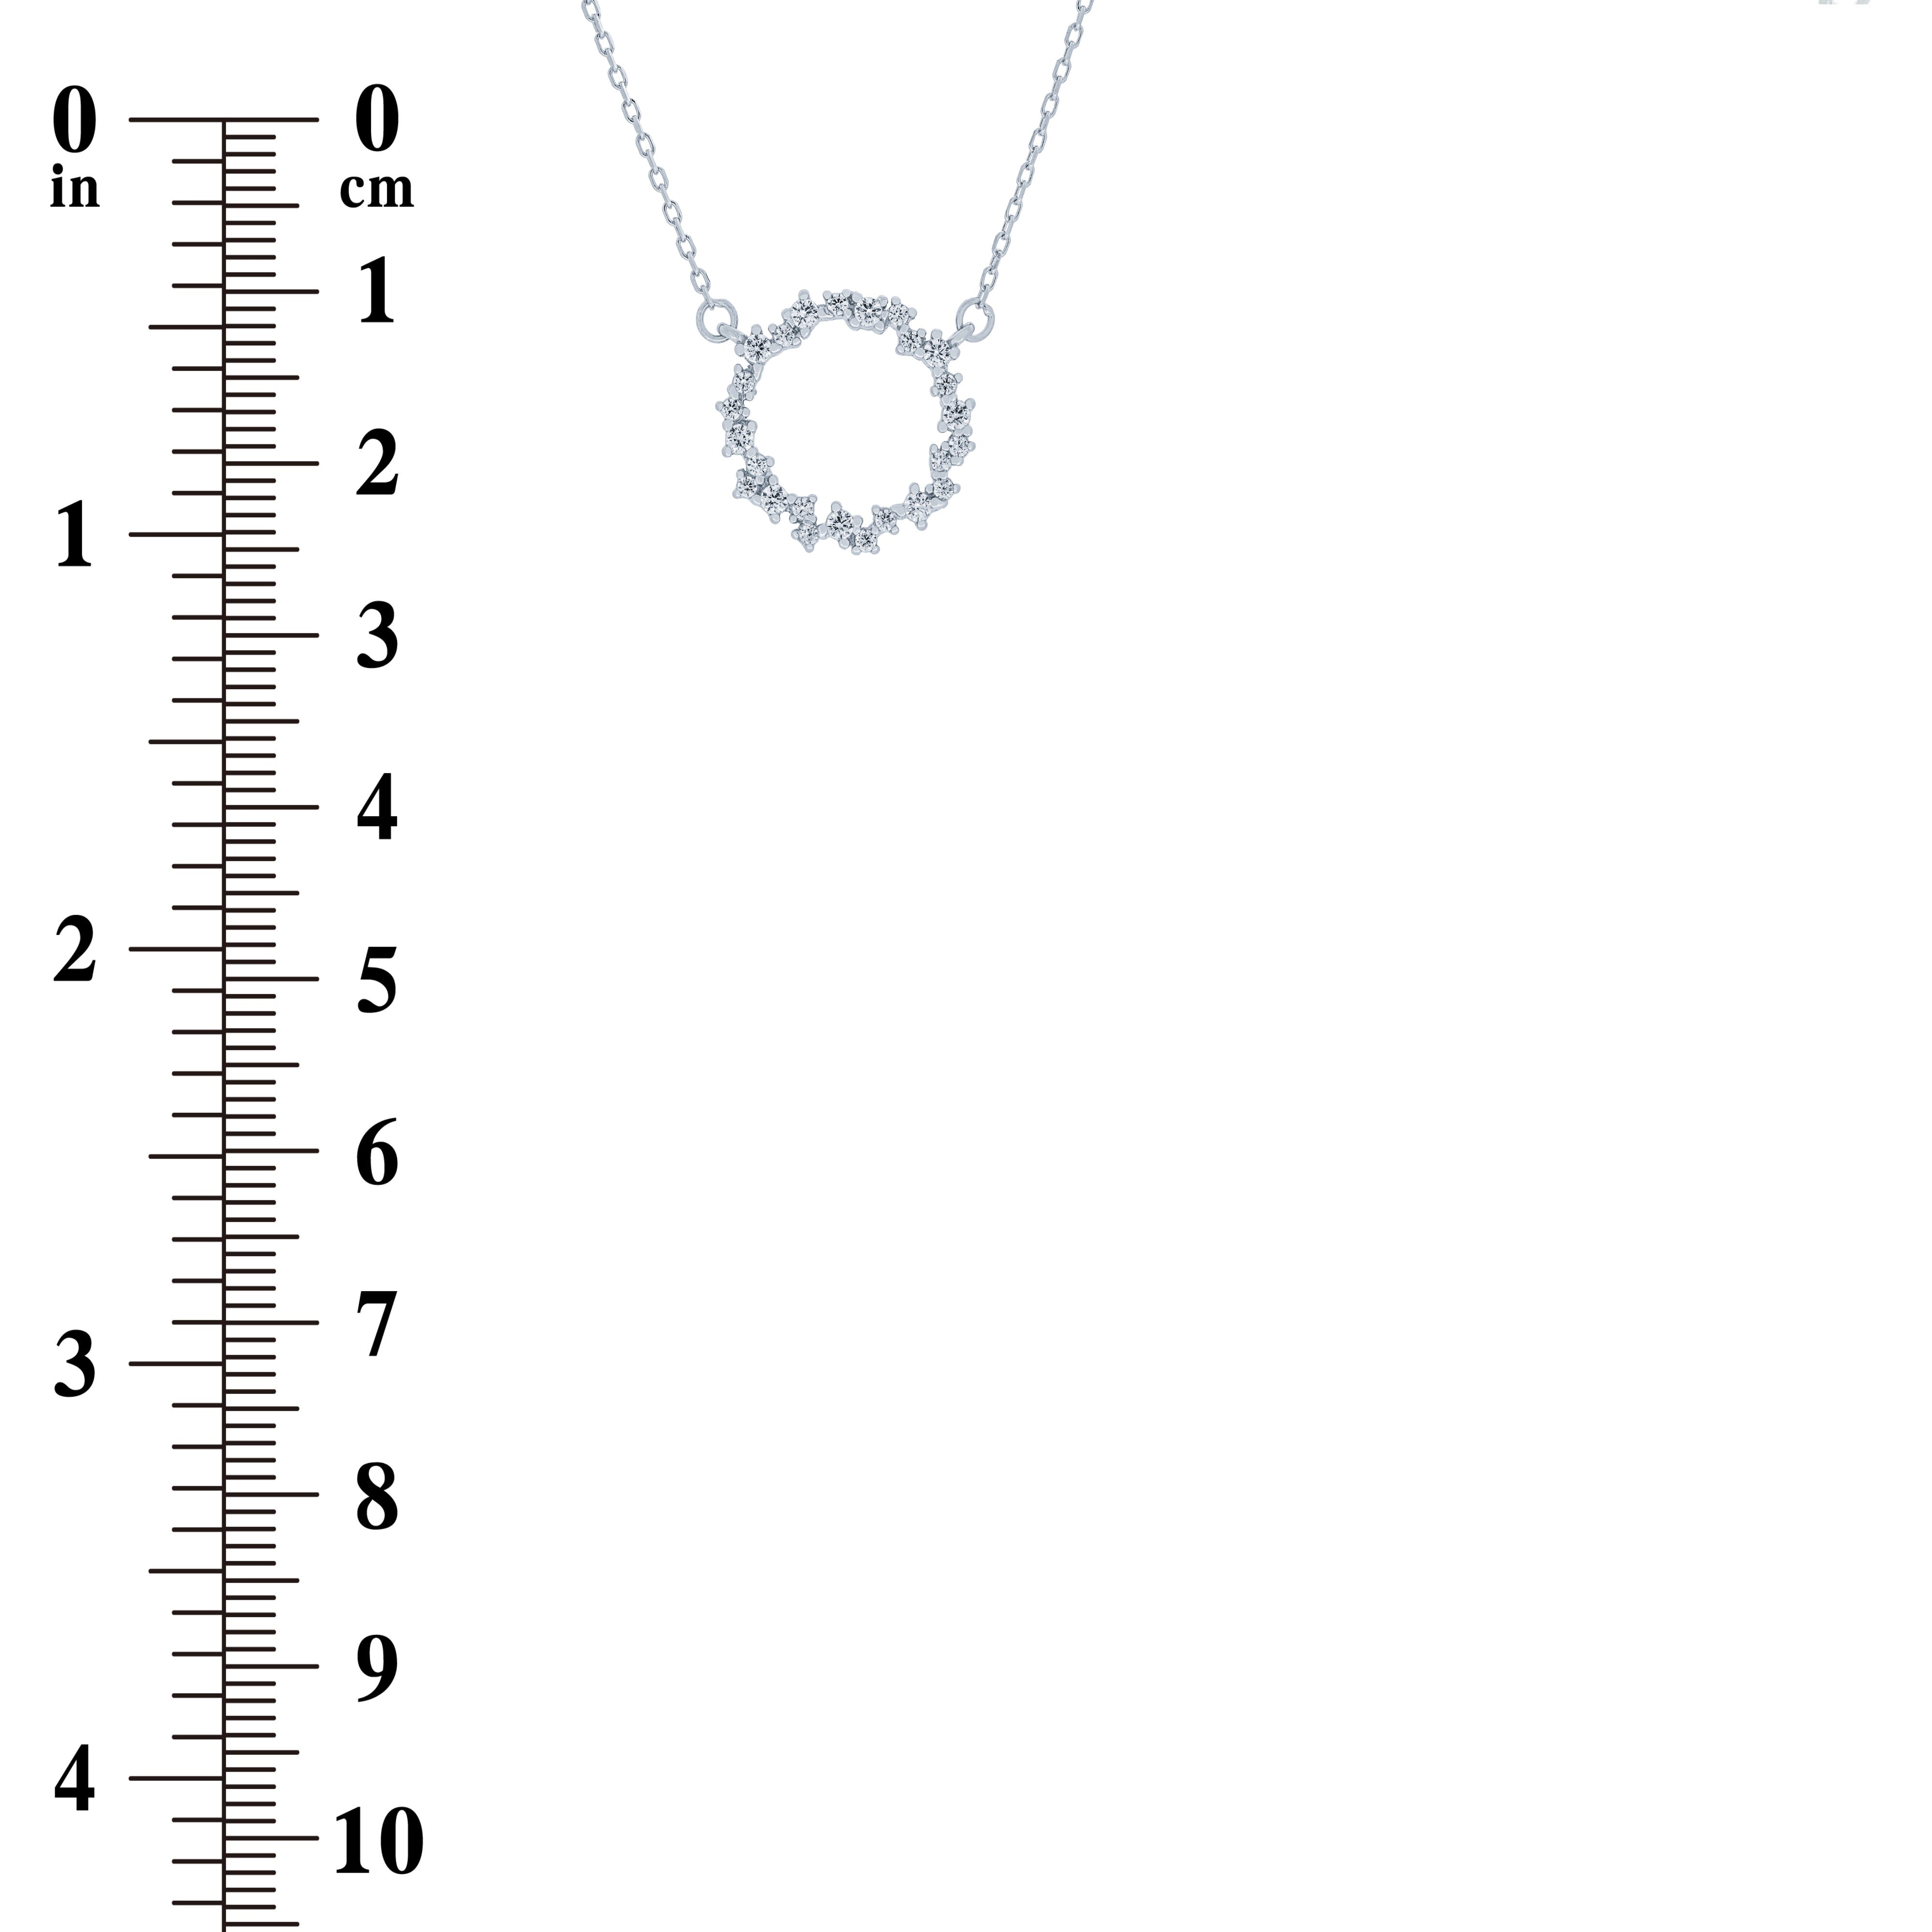 (100135) Circle White Cubic Zirconia Necklace In Sterling Silver